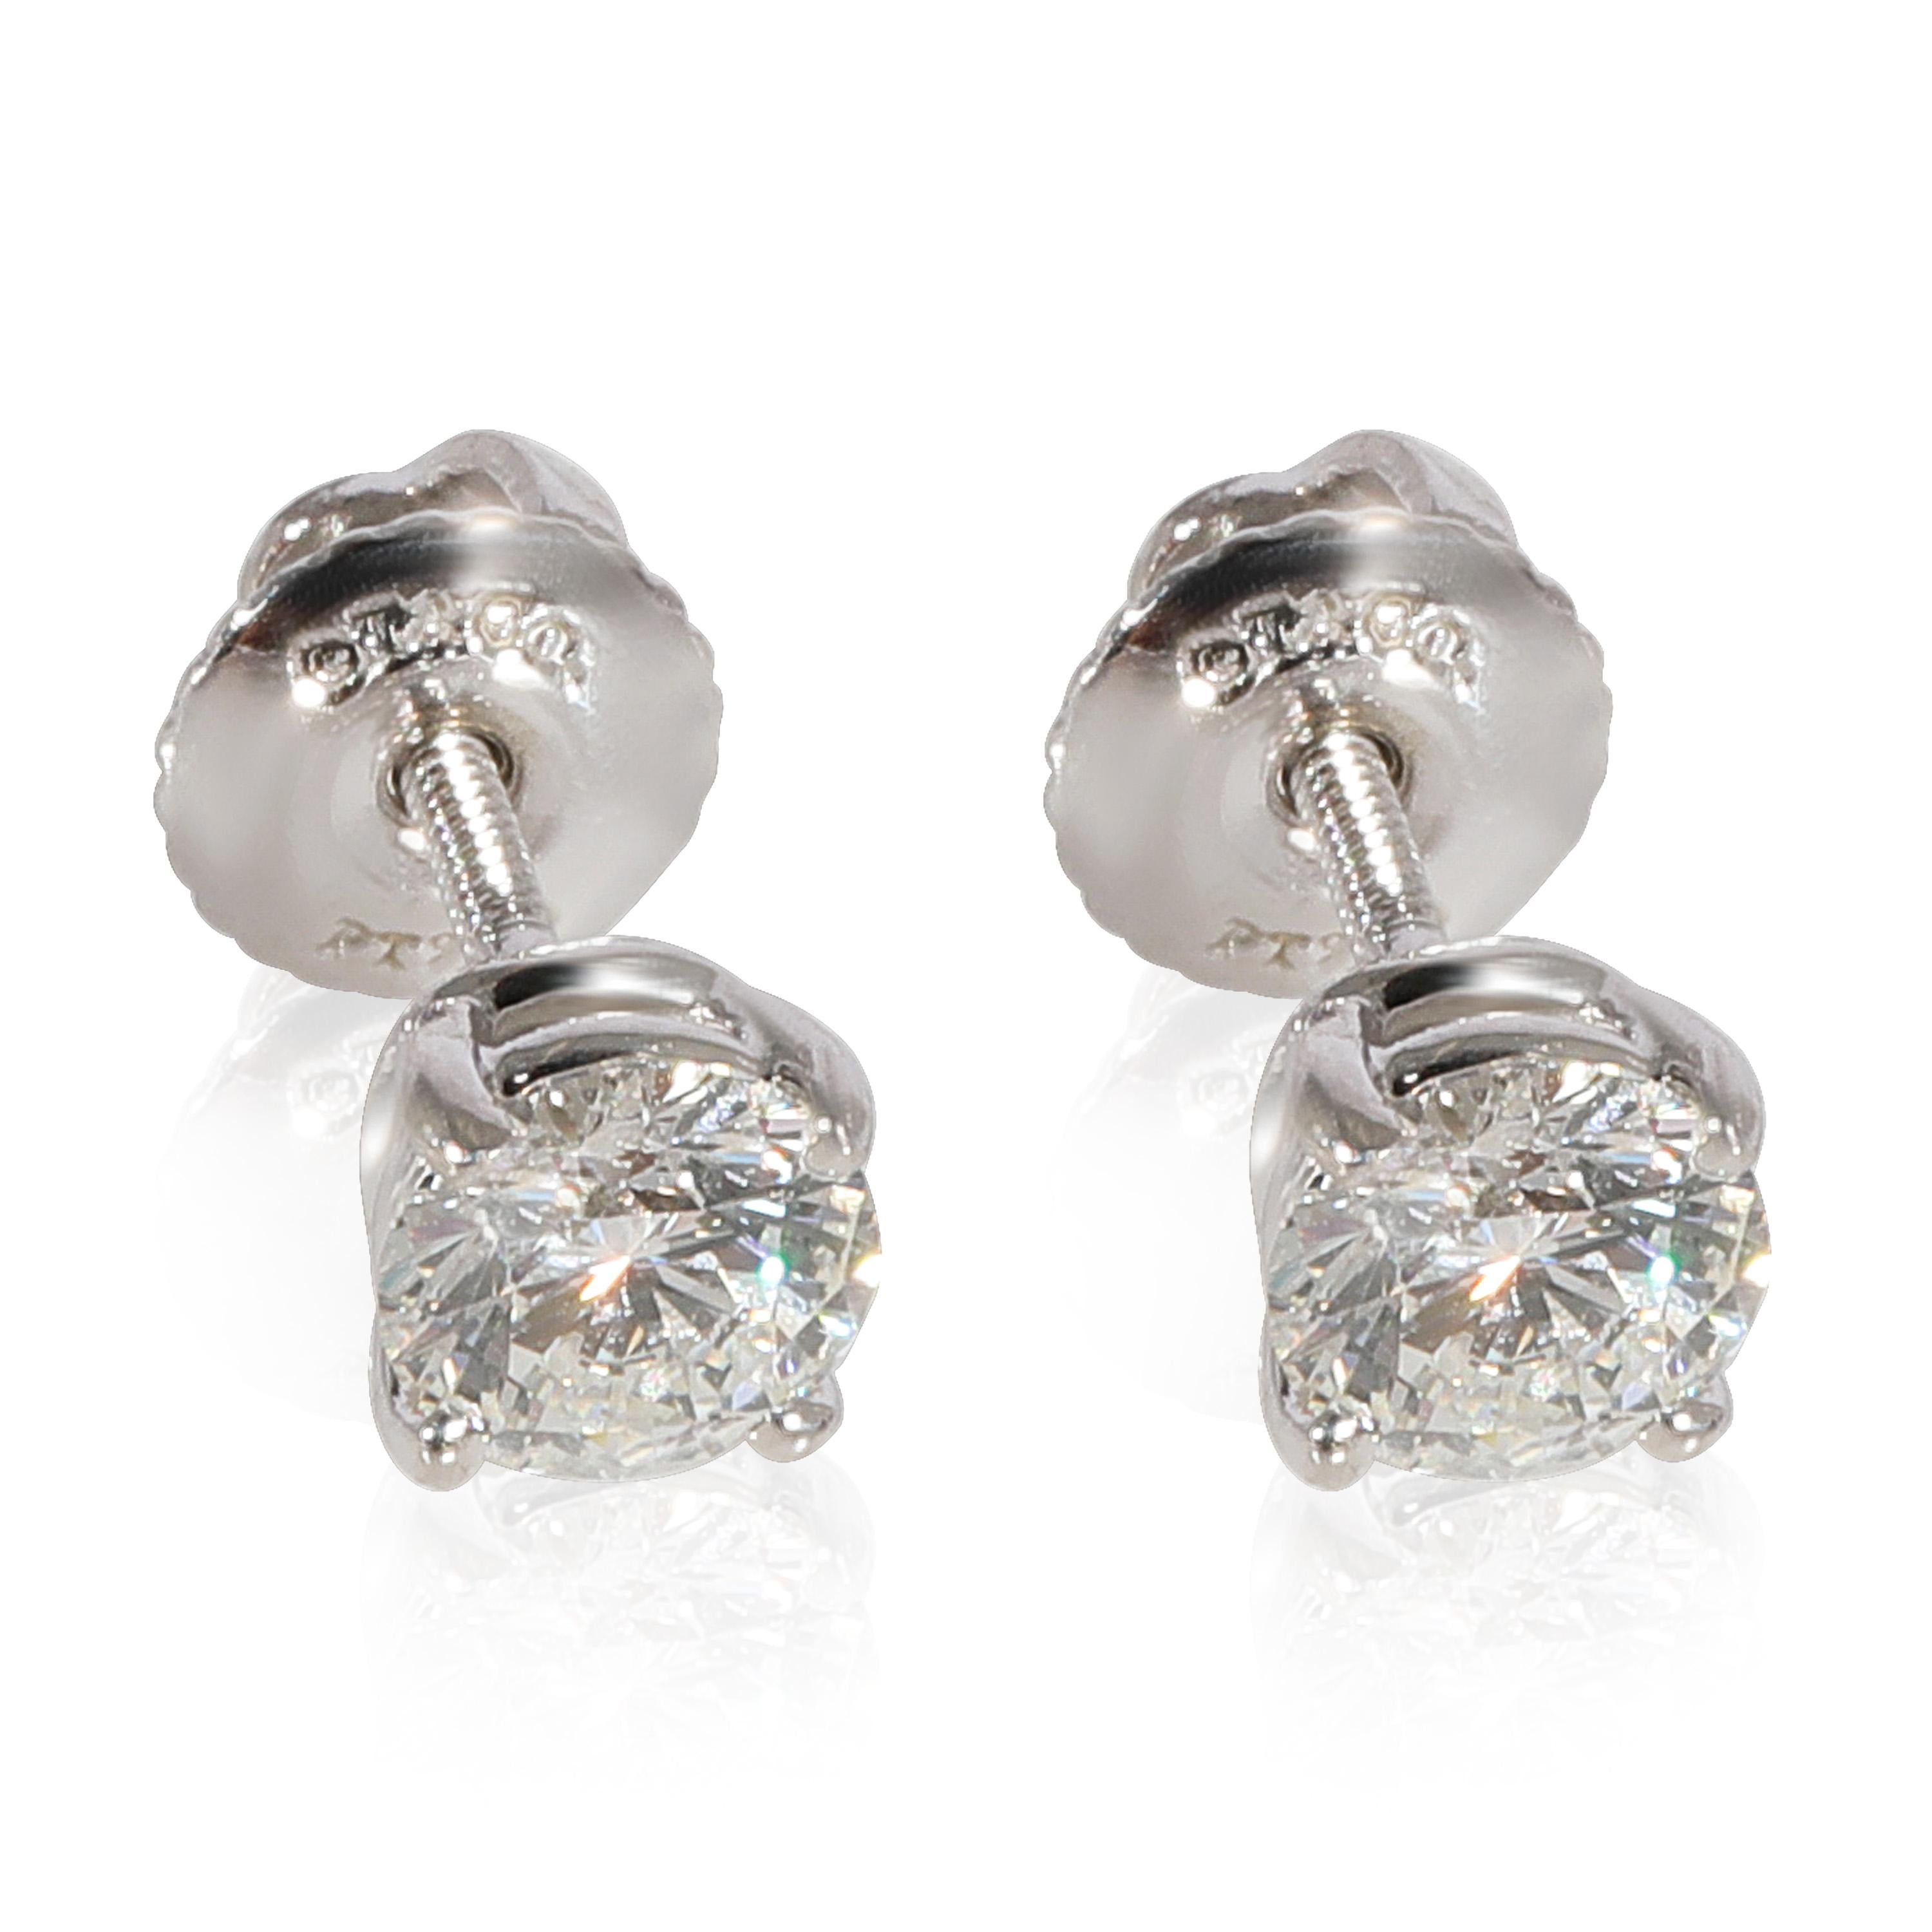 Tiffany & Co. Diamond Stud Earring in 950 Platinum H VVS2 0.82 CTW

PRIMARY DETAILS
SKU: 124819
Listing Title: Tiffany & Co. Diamond Stud Earring in 950 Platinum H VVS2 0.82 CTW
Condition Description: Retails for 7500 USD. In excellent condition and